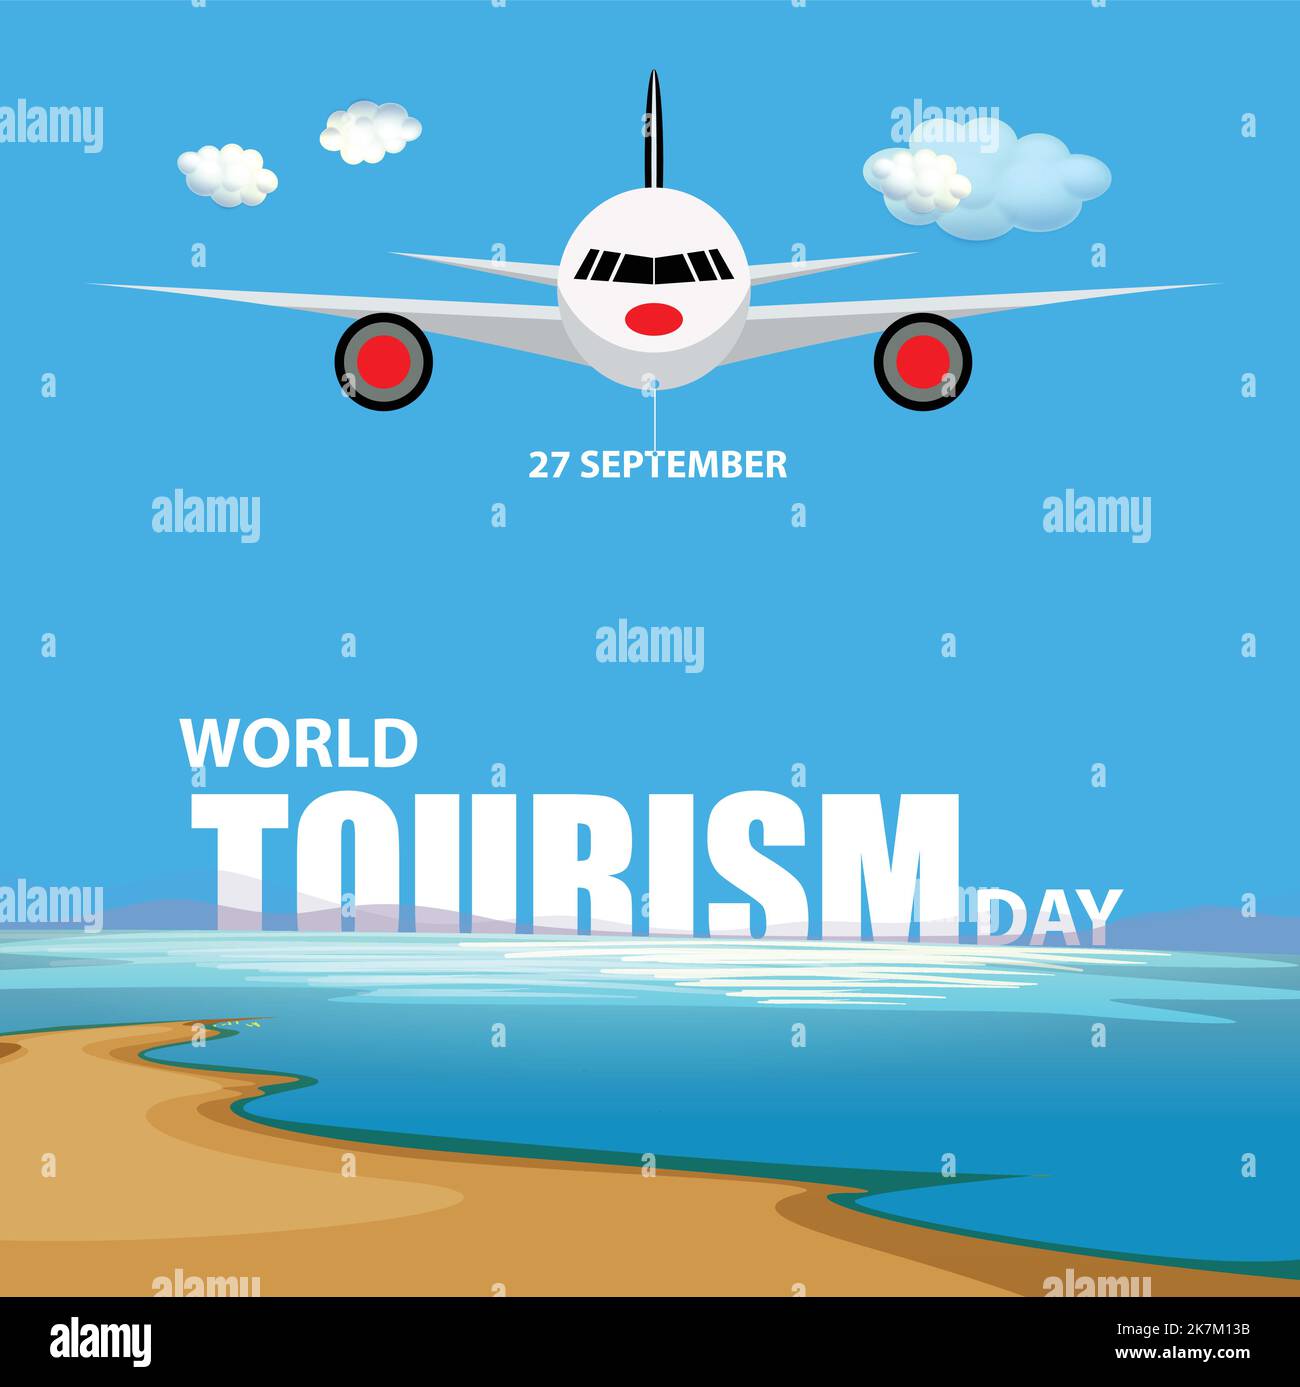 World tourism day 27 September beautiful typography with beach, ocean, sky and airplane vector illustration. Stock Vector